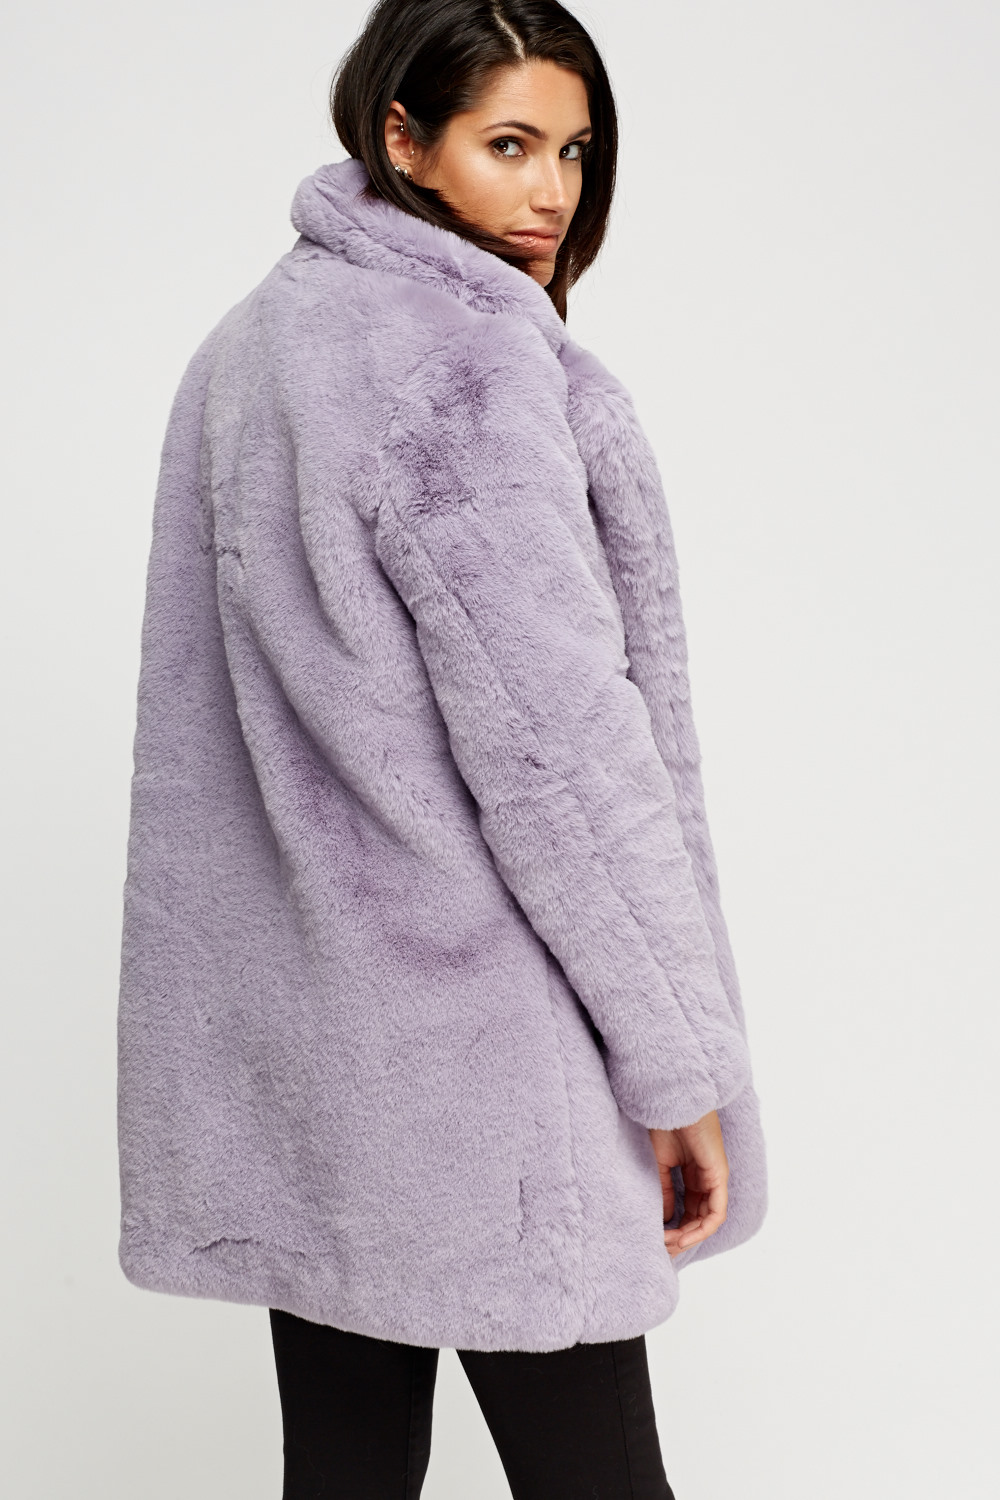 K.Zell Lilac Teddy Bear Faux Fur Coat - Limited edition | Discount ...